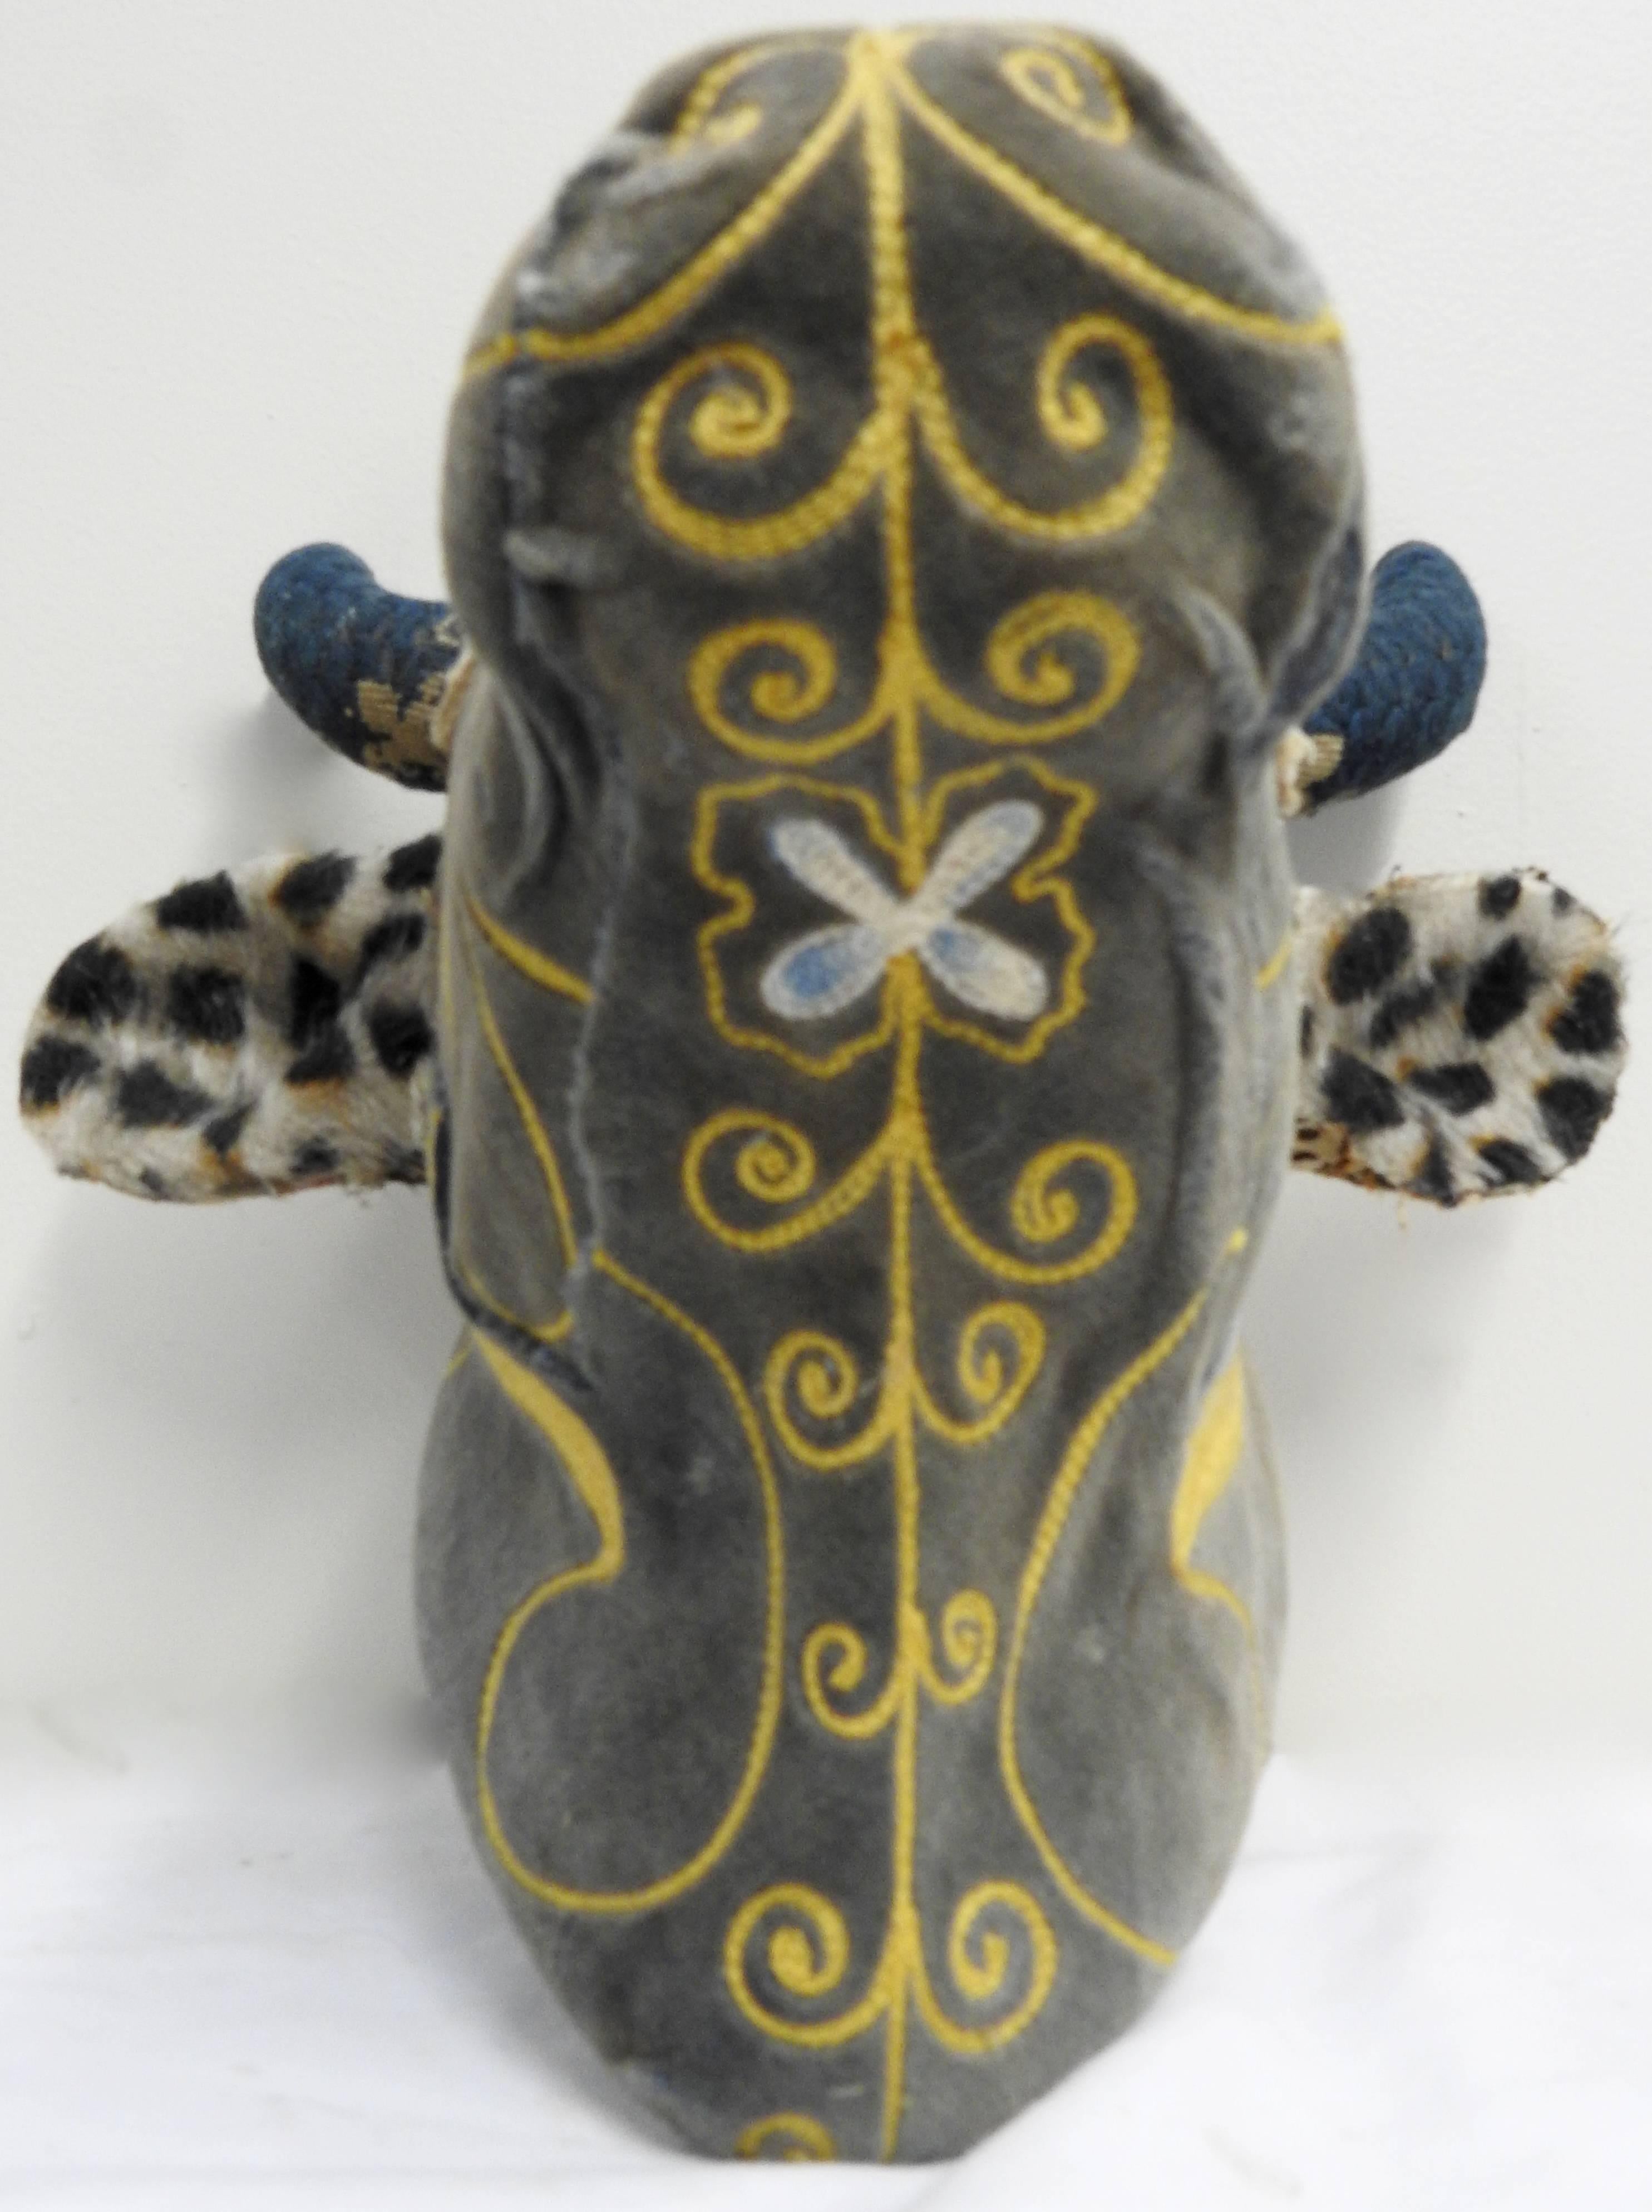 An exquisite porcelain wall mount heifer that sports a variety of vintage and antique textiles. The main part of her face is a soft velvet with beautiful embroidery. The front part of the ears are covered with an animal print fur. The backs of the